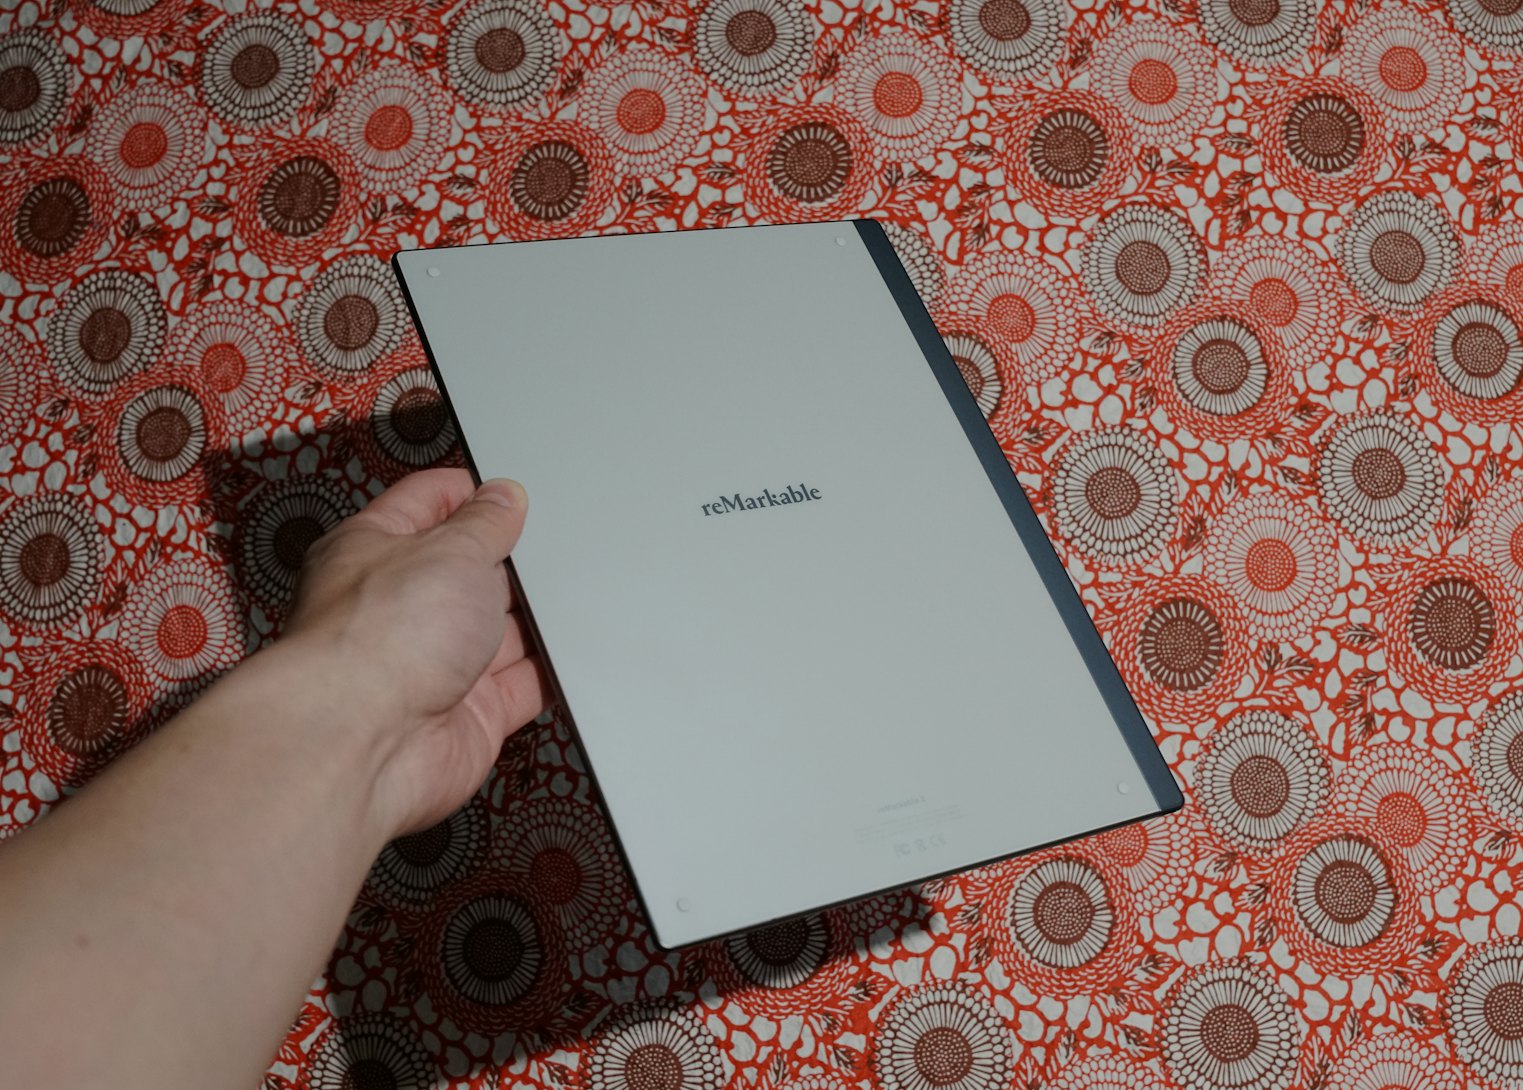 The reMarkable 2 tablet has finally replaced my trusty paper notebook